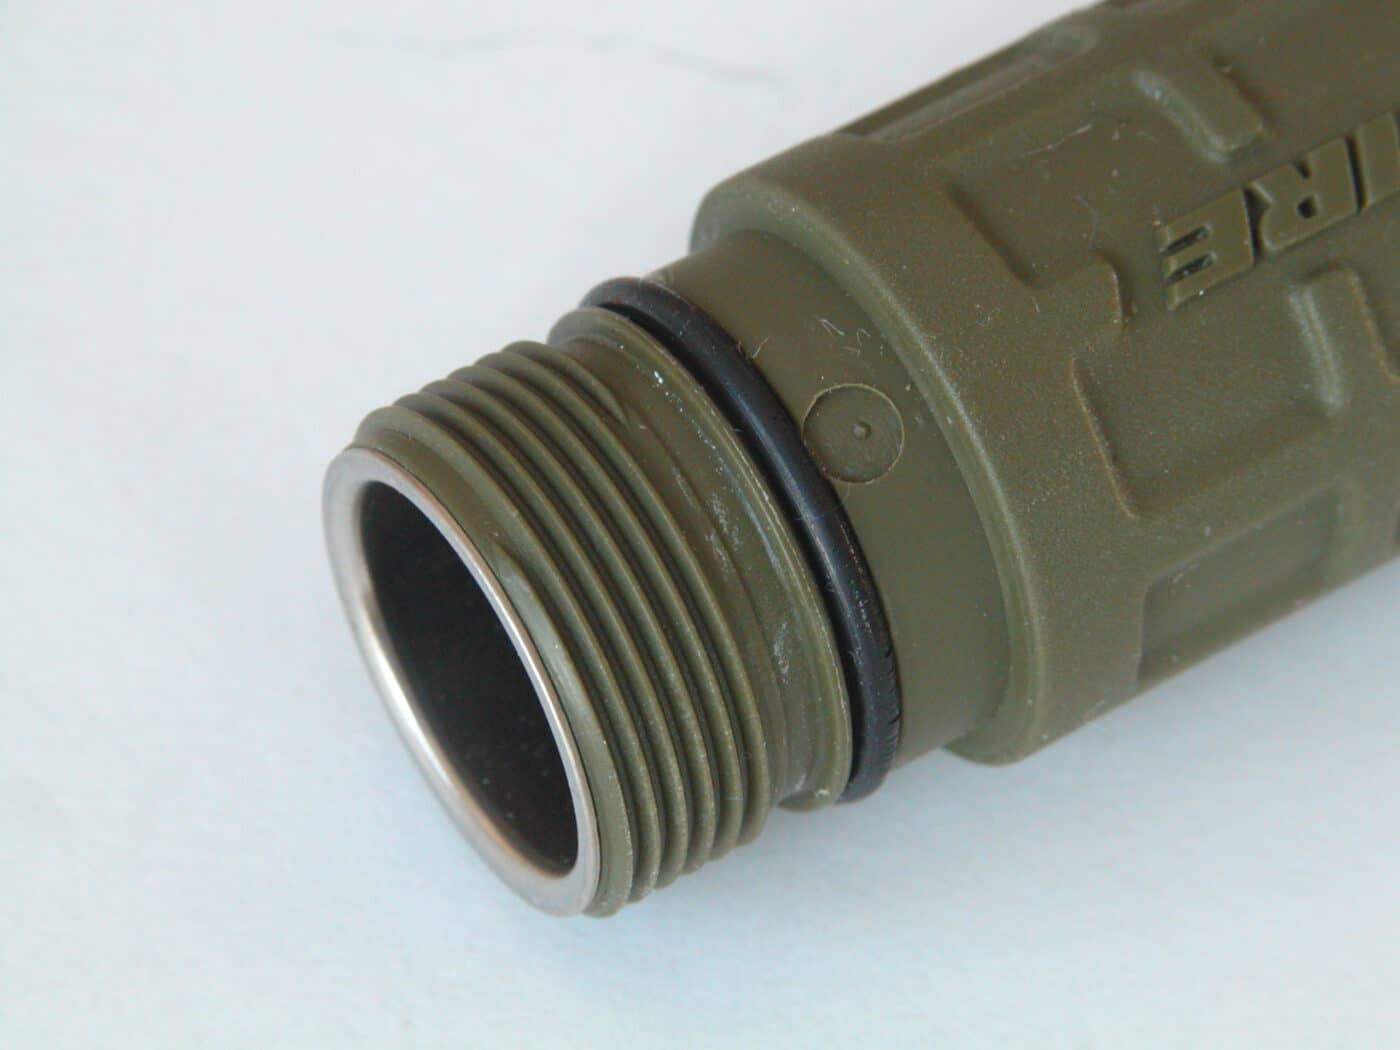 waterproofing the battery compartment of a flashlight